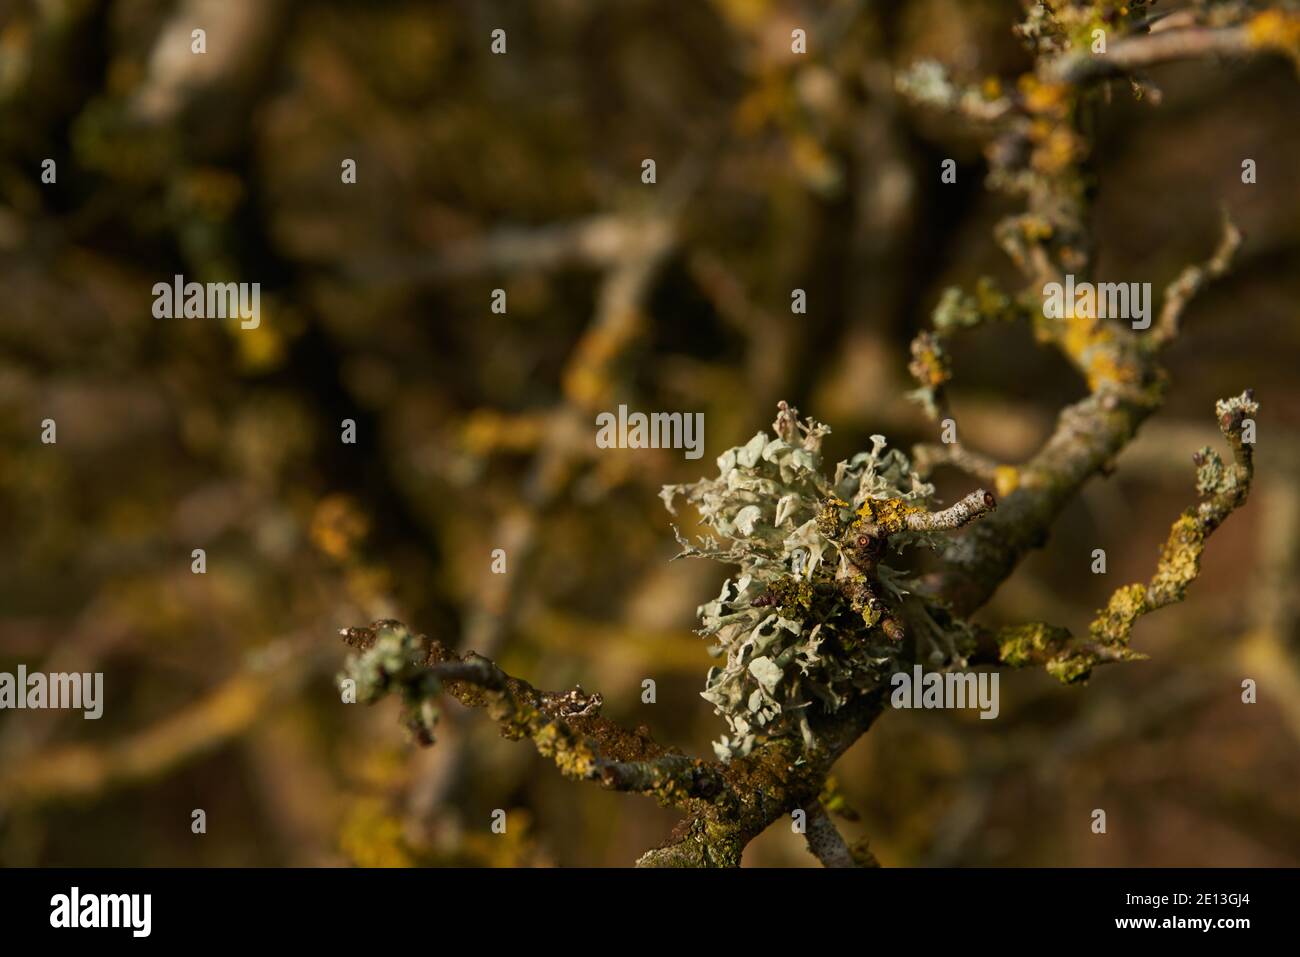 Lichens on trees in winter at RSPB Reserve College Lake Hertfordshire Stock Photo